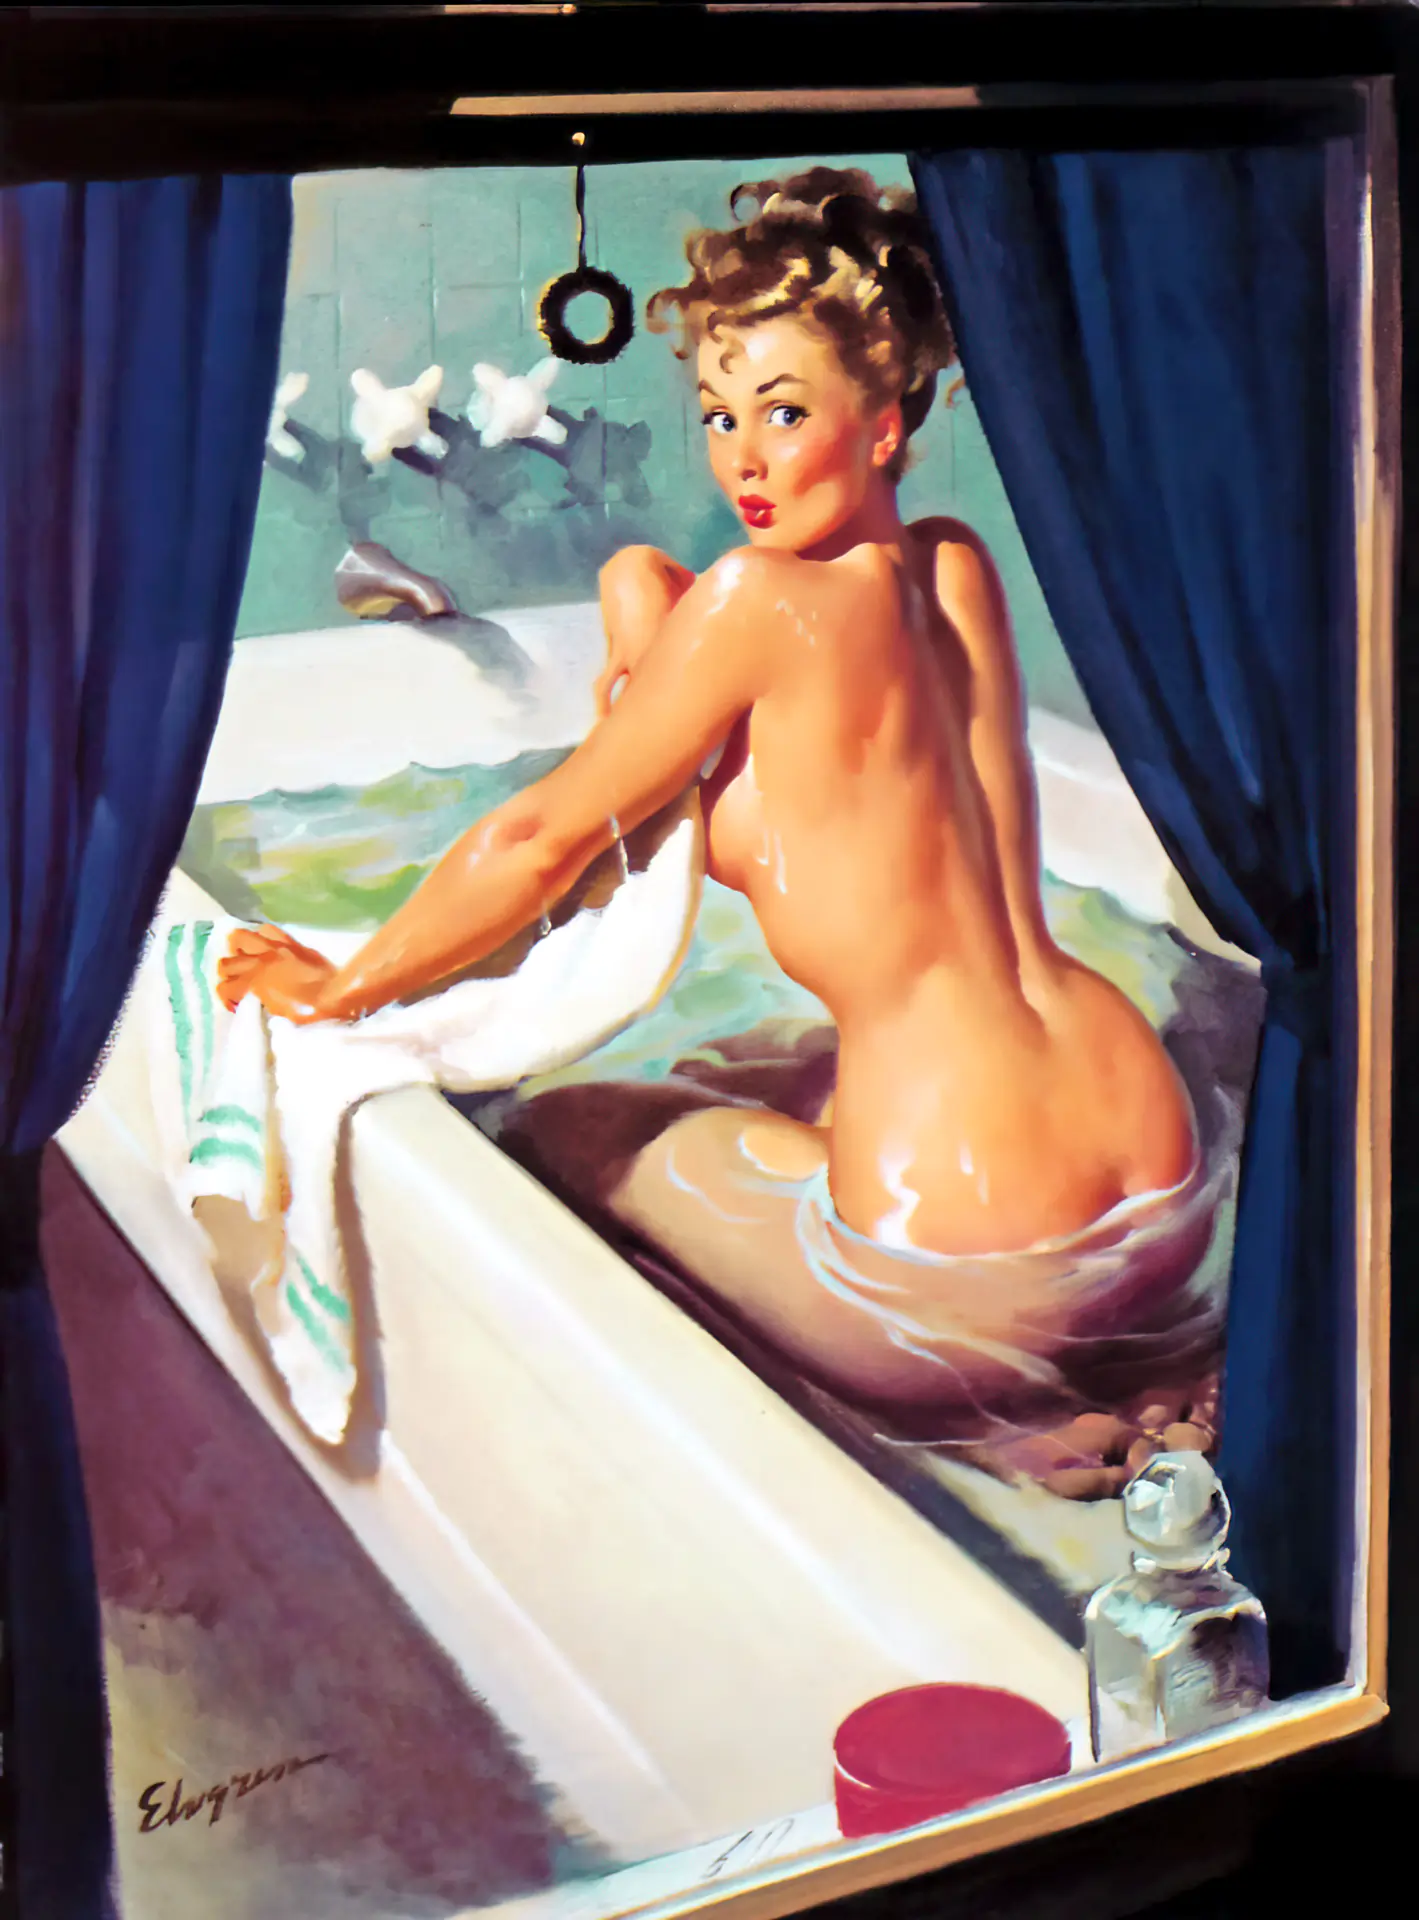 Delicious classic blonde tries to cover up her body in a bathtub